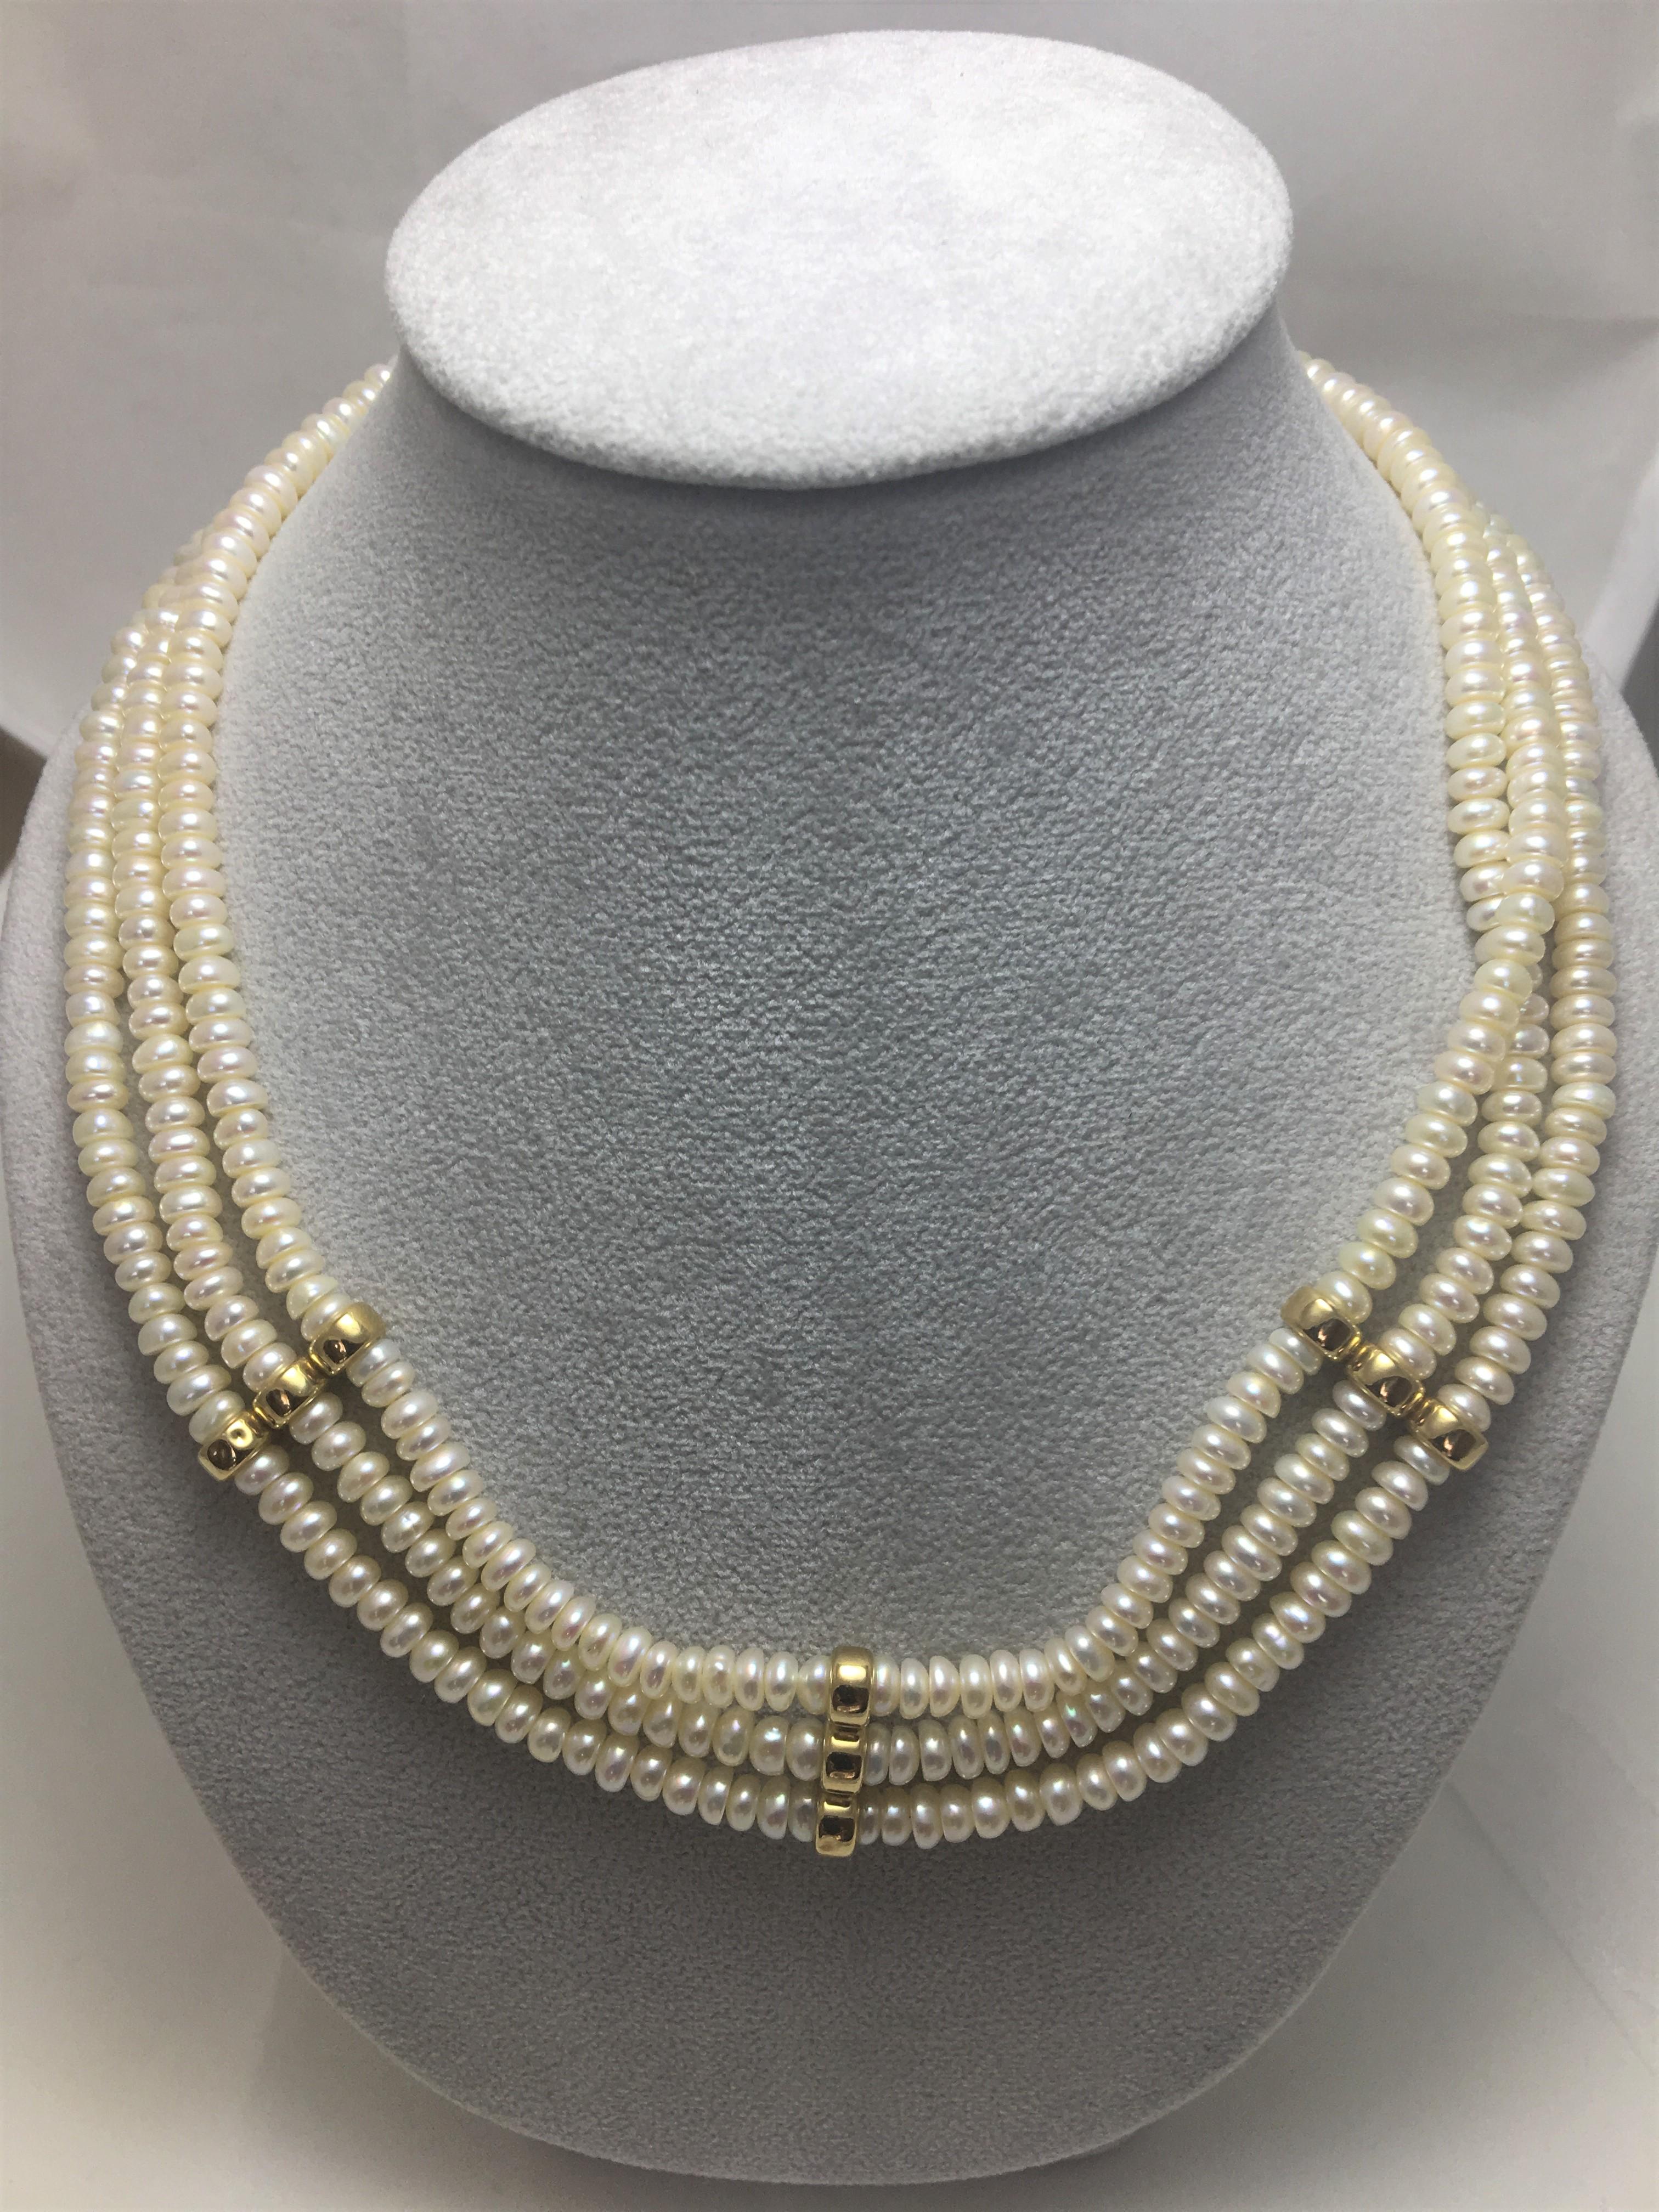 Raymond Mazza Designer
Three Strand Cream Colored Button Pearl Choker Necklace 
14 Karat Yellow Gold filigree clasp
Three 14 Karat Yellow Gold Stations that Hold Strands Together
Over 100 Cream Colored Fresh Water Pearls On Each Strand
Button Pearls